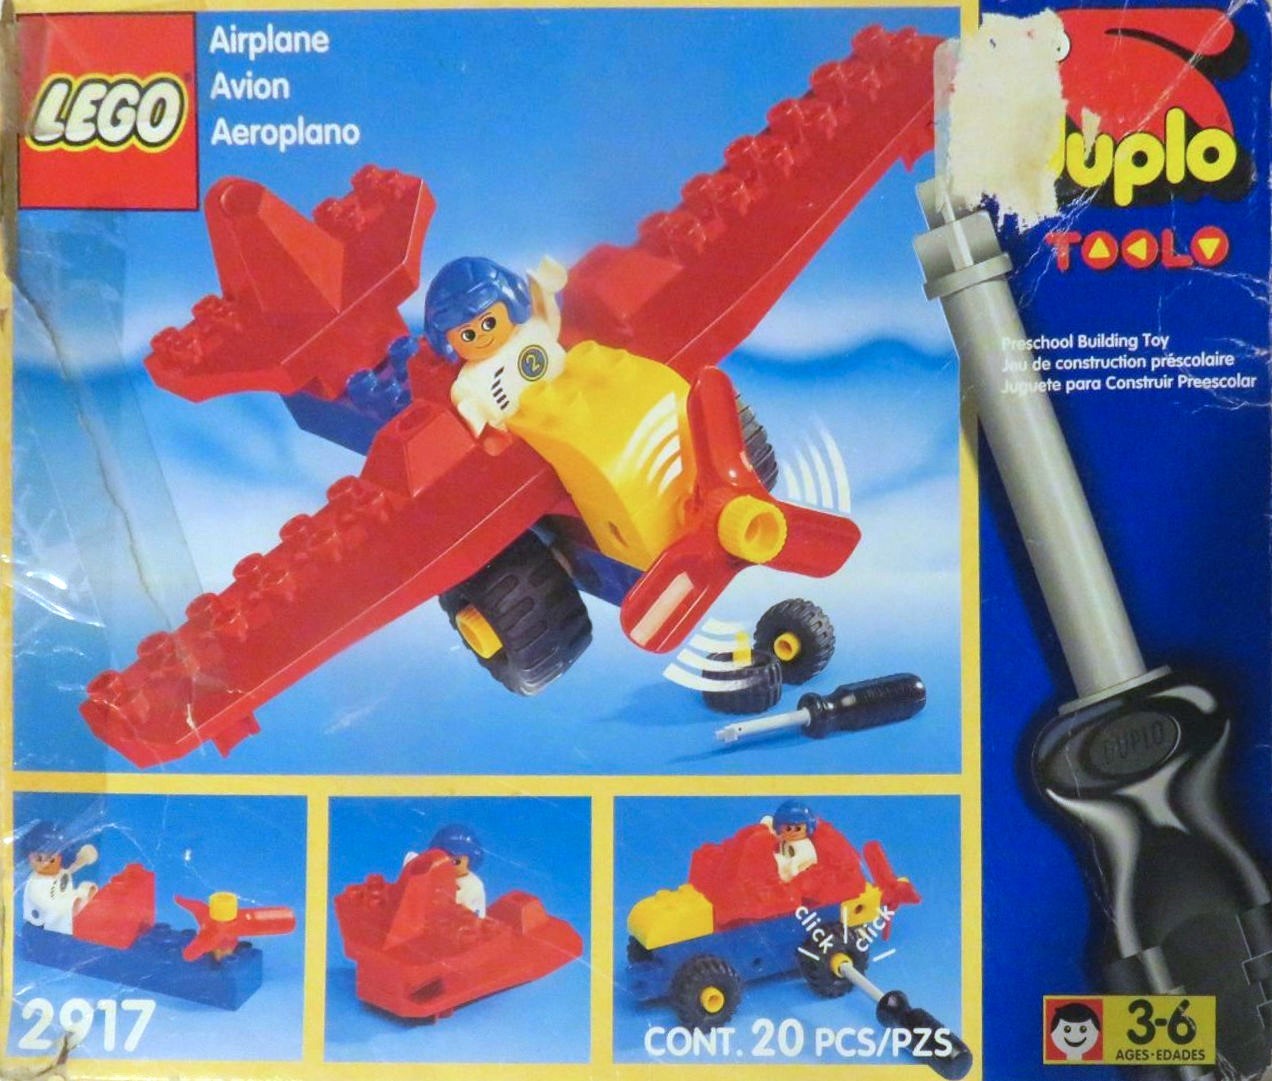 LEGO 2930 Mobile Crane Set Parts Inventory and Instructions - LEGO